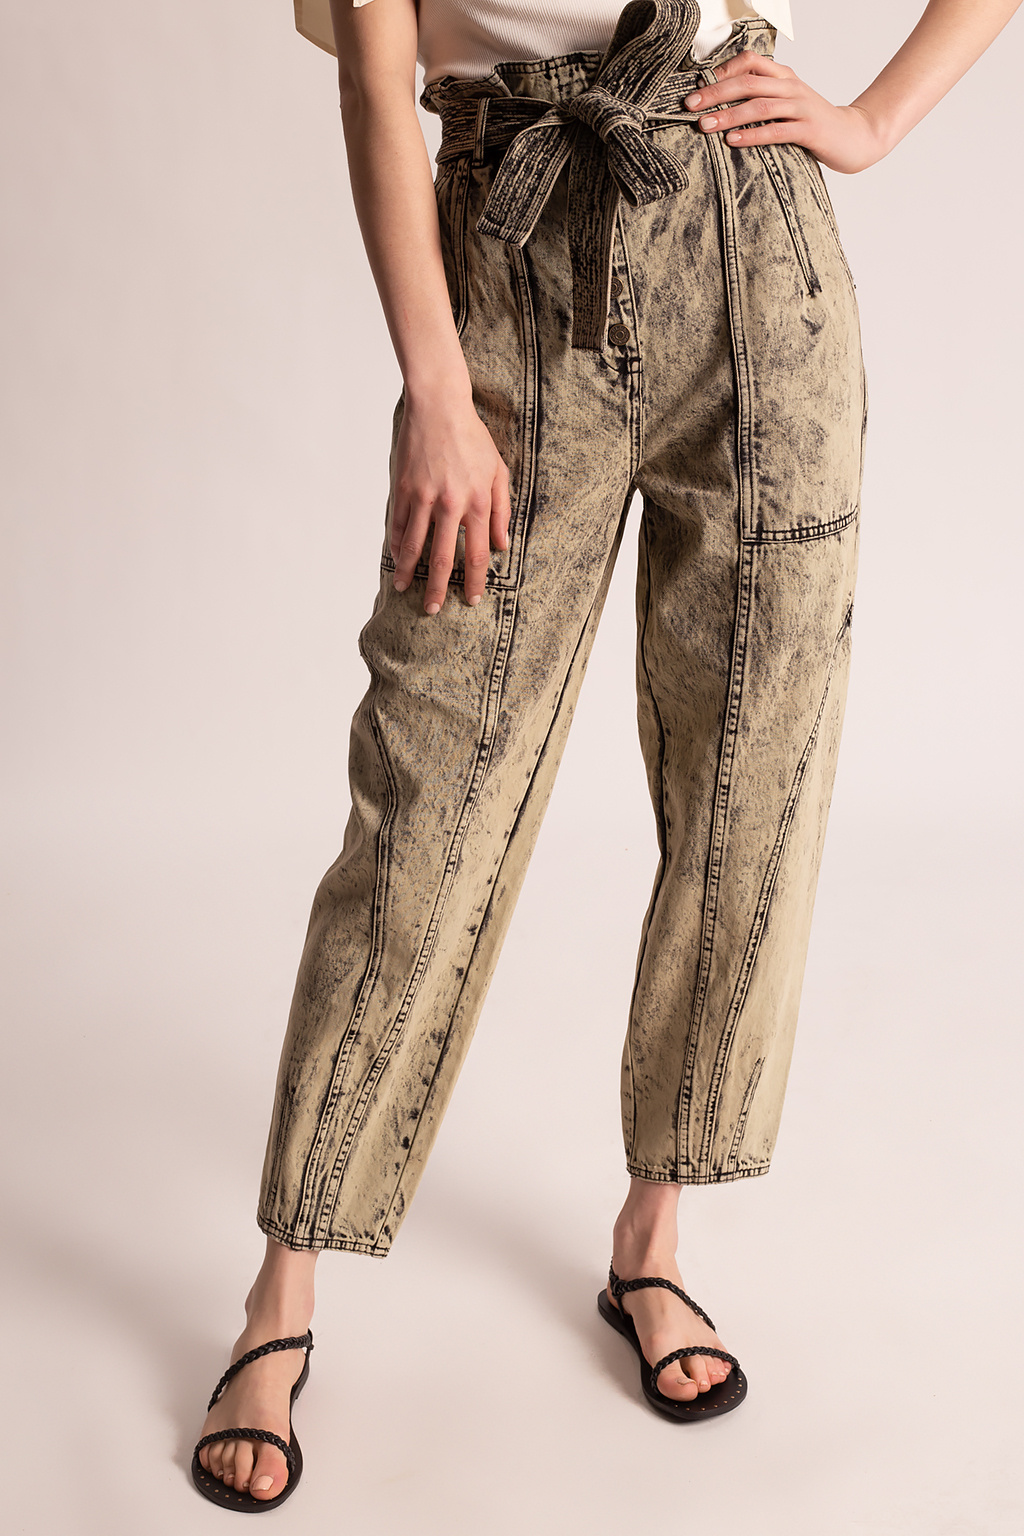 Ulla Johnson ‘Brier’ high-waisted jeans